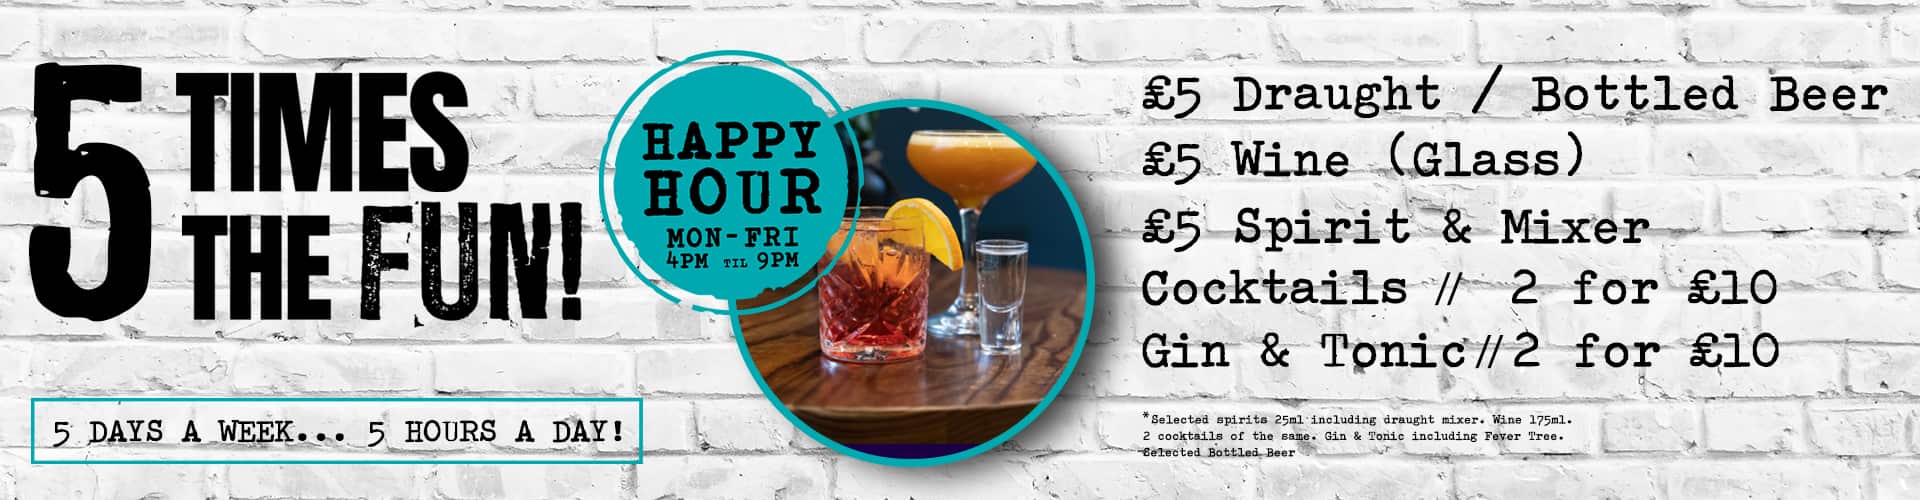 Forge Happy Hour Offer - Monday to Friday 4pm - 9pm